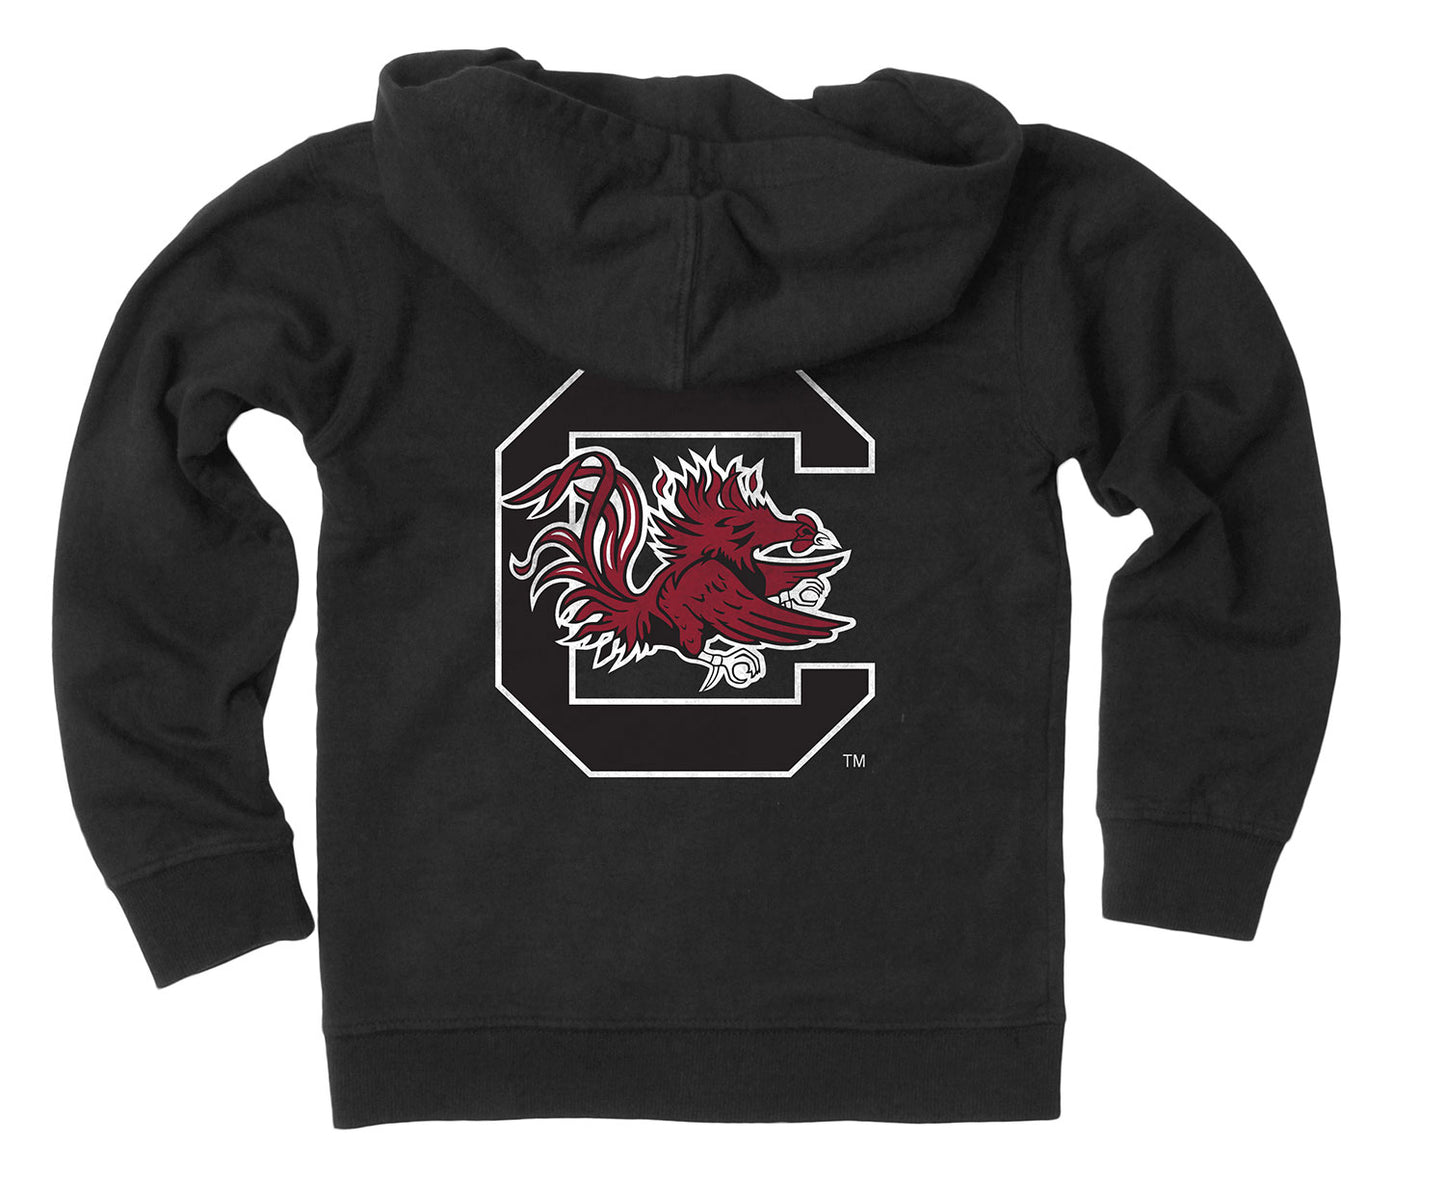 South Carolina Gamecocks Wes and Willy Boys Zip Up Fleece Hooded Jacket